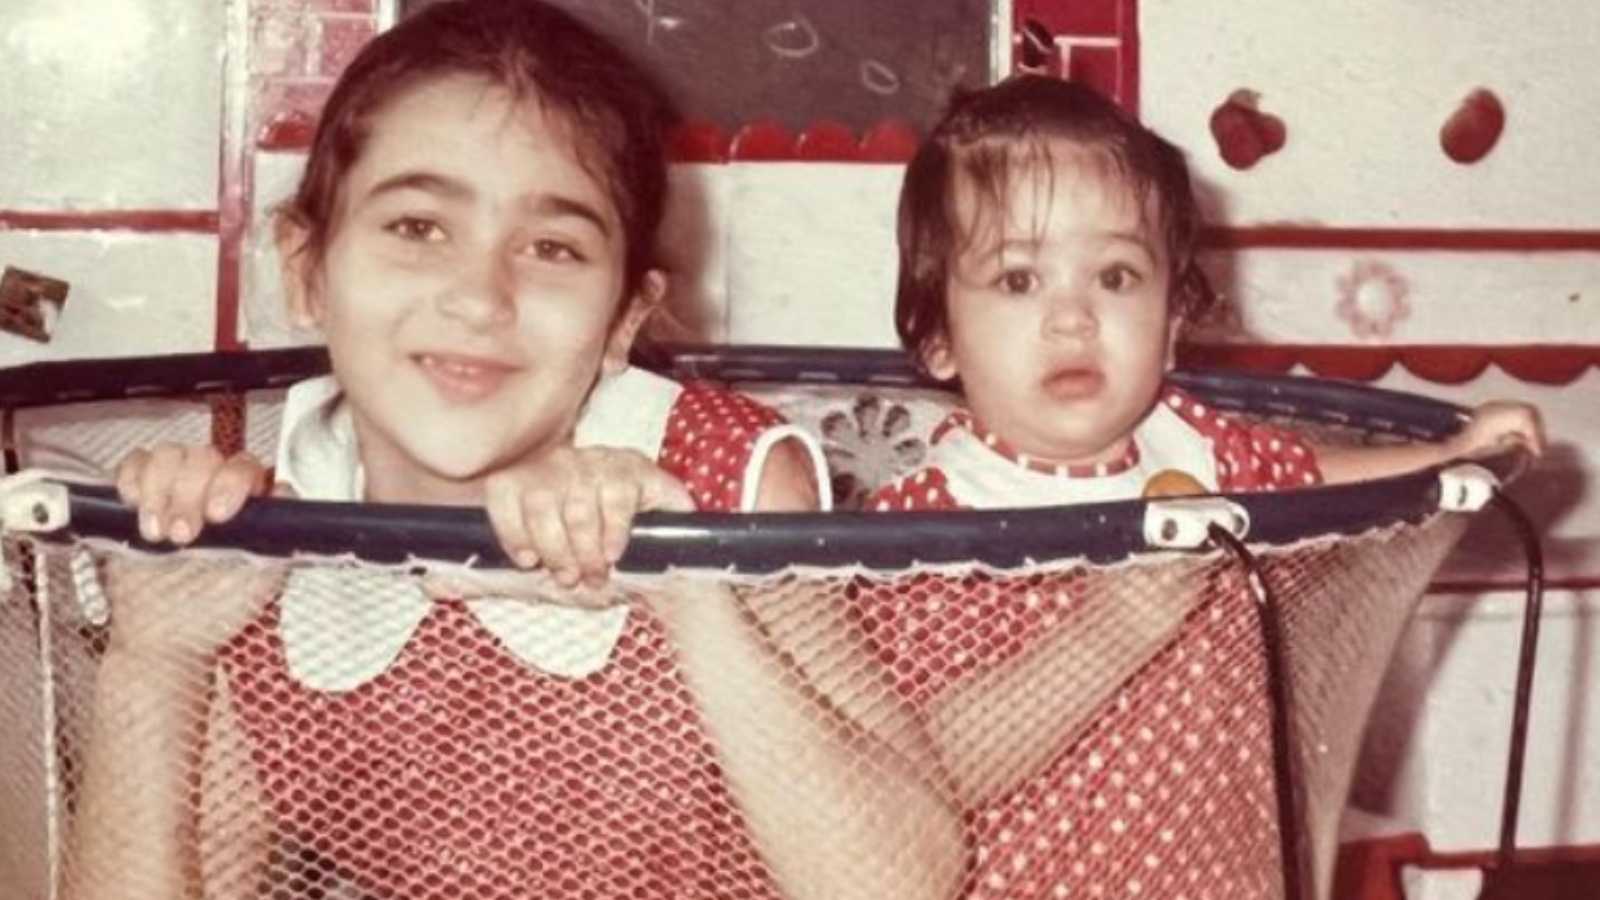 'Always by your side' : Karisma Kapoor shares an adorable throwback picture on sister Kareena Kapoor's birthday